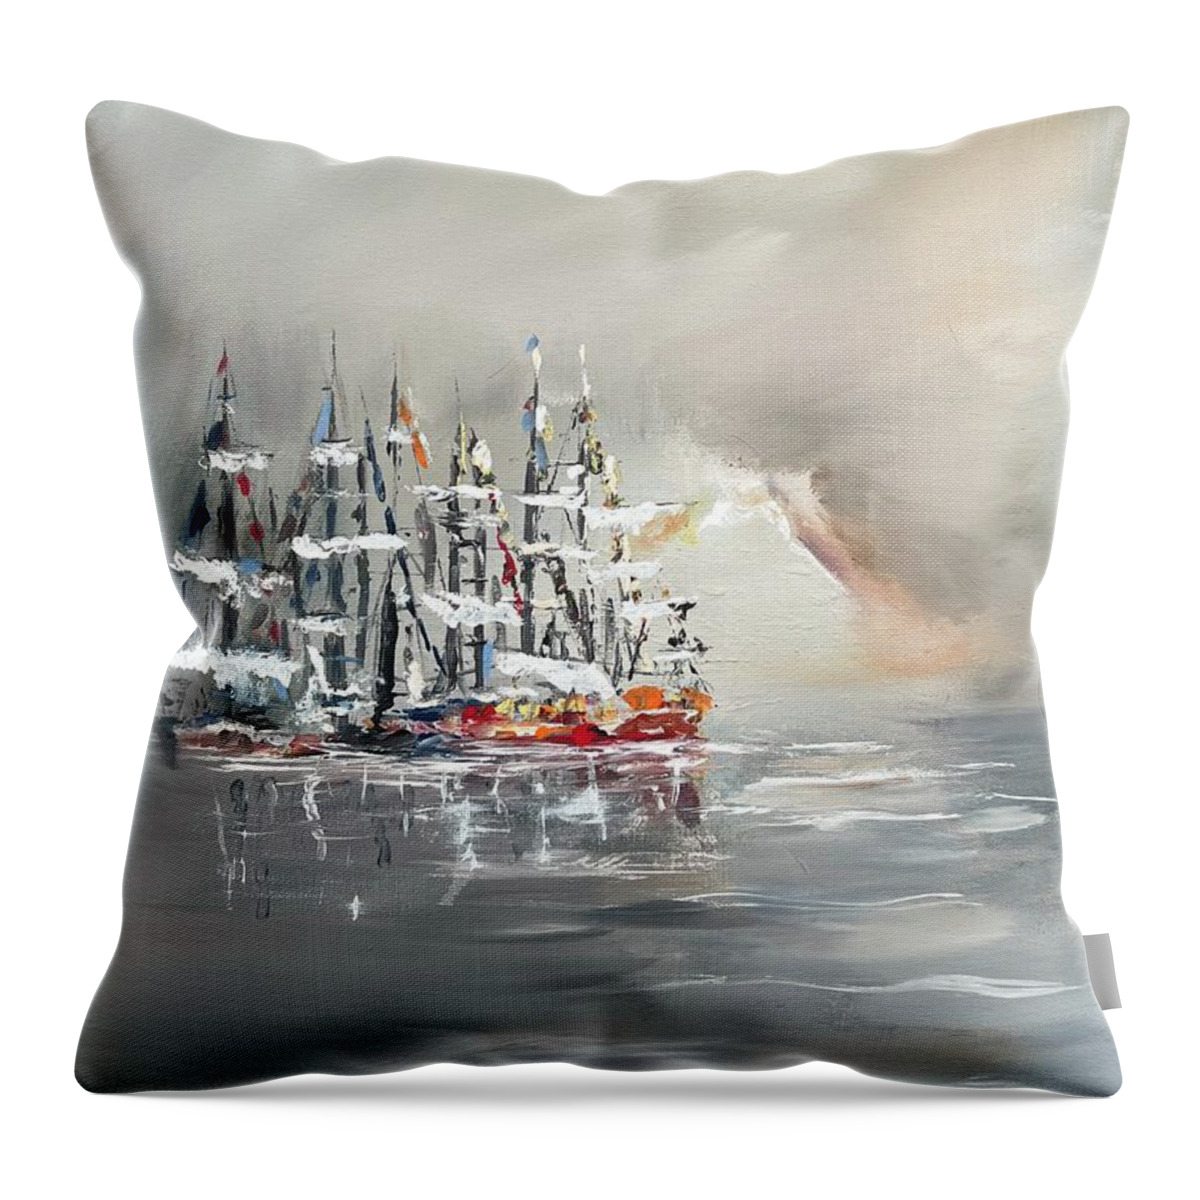 Sailing Boats At Harbor Miroslaw Chelchowski Acrylic Painting Print Ocean Dark Rest Boats Cloudy Seascape Water Gray Throw Pillow featuring the painting Sailing boats at harbor by Miroslaw Chelchowski